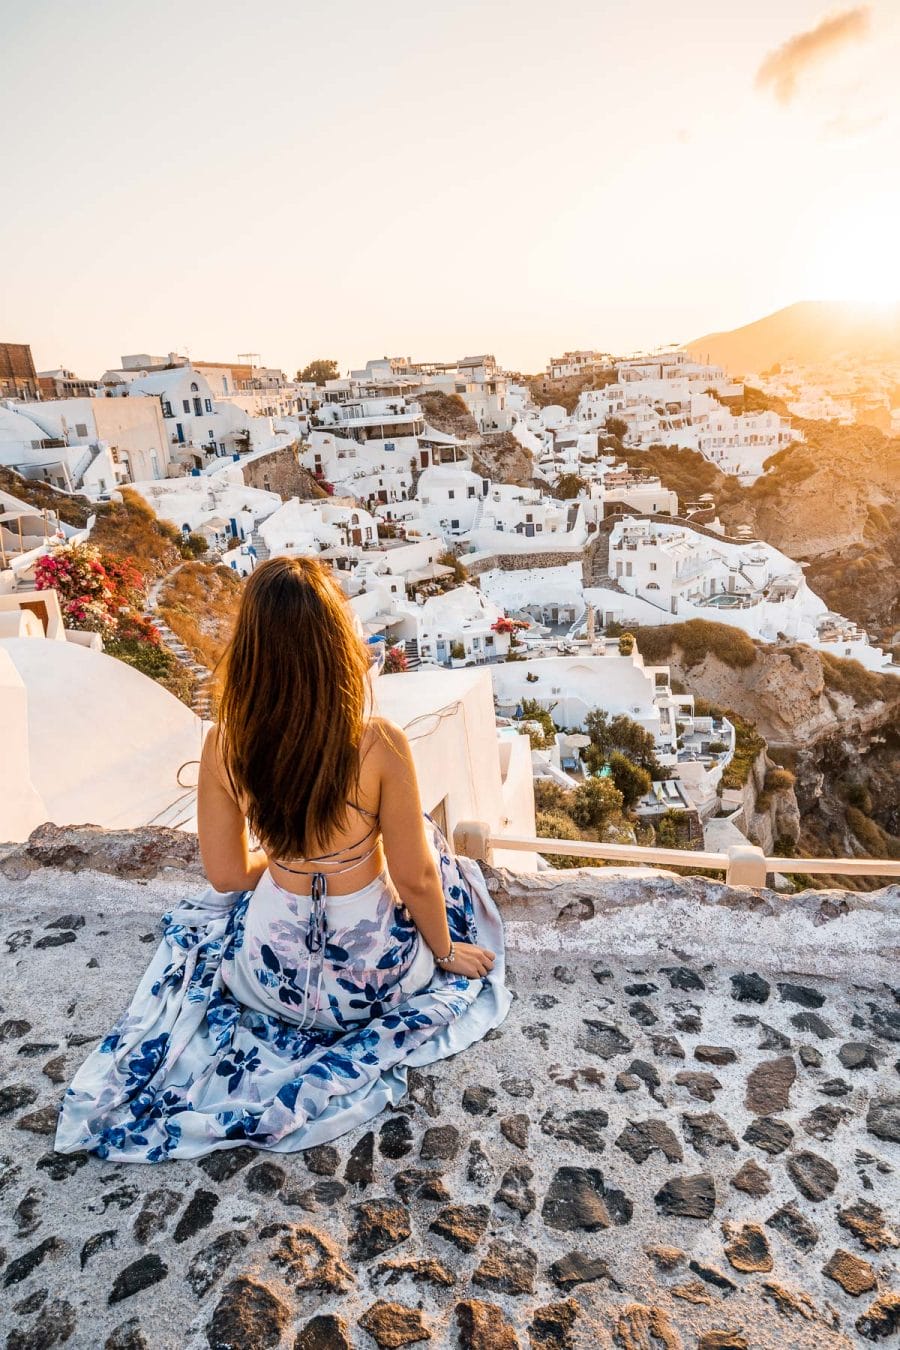 Girl in a blue floral dress sitting on a stone pathway, watching the sunrise in Oia, Santorini